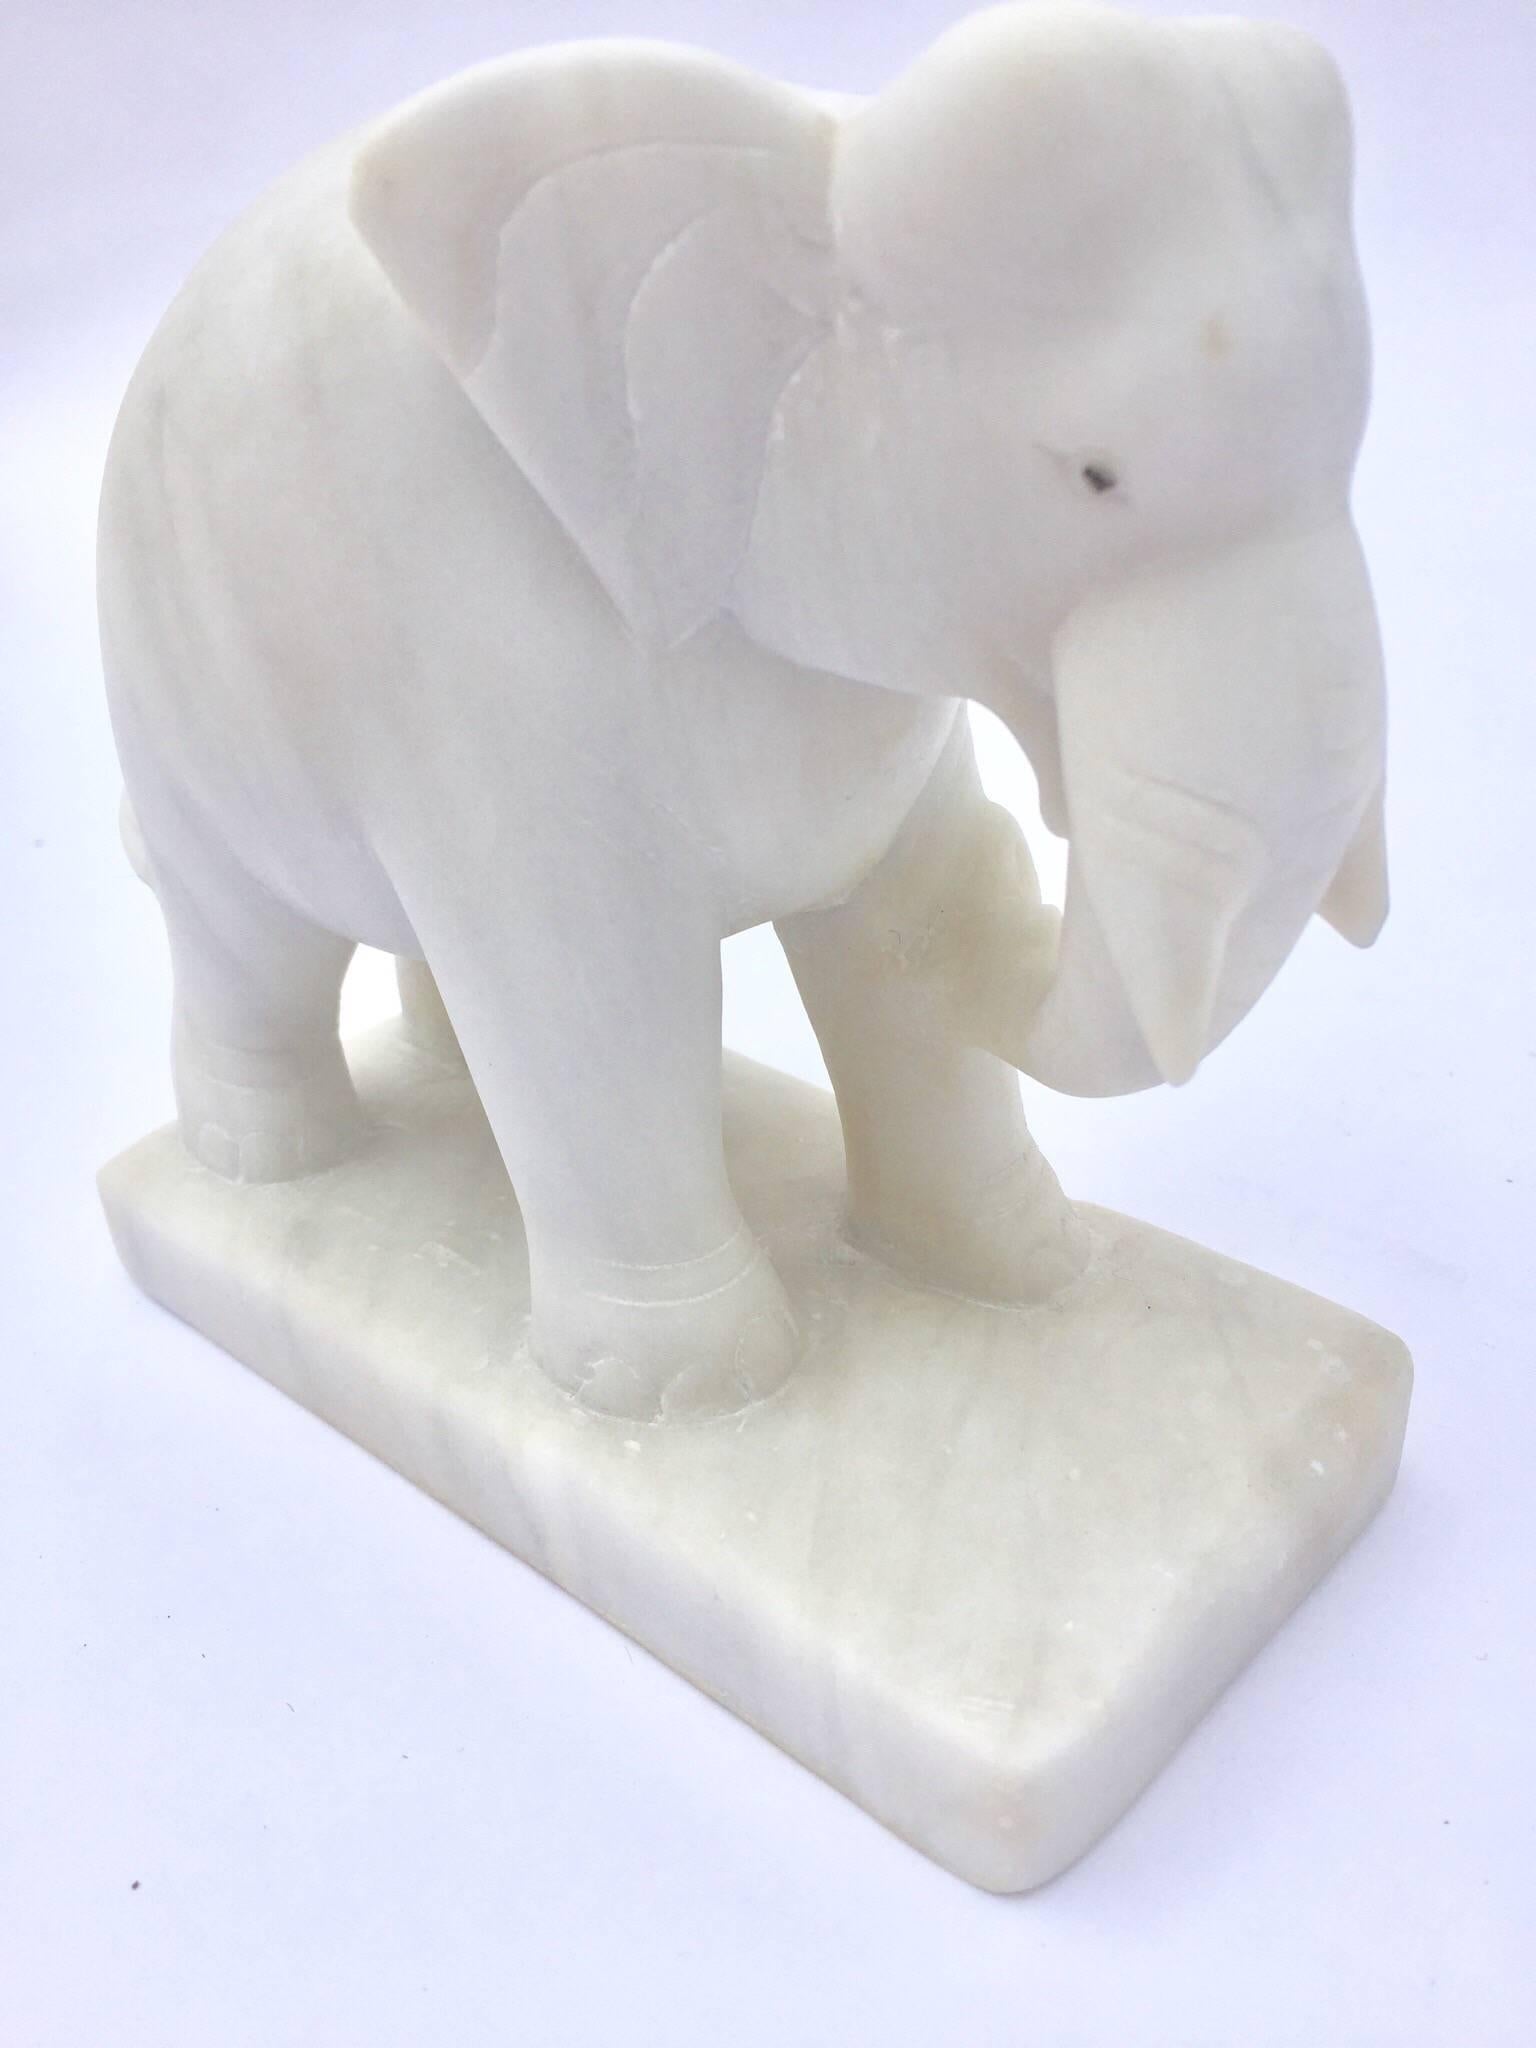 Indian Hand-Carved White Elephant Marble Sculpture Jaipur, Rajasthan India